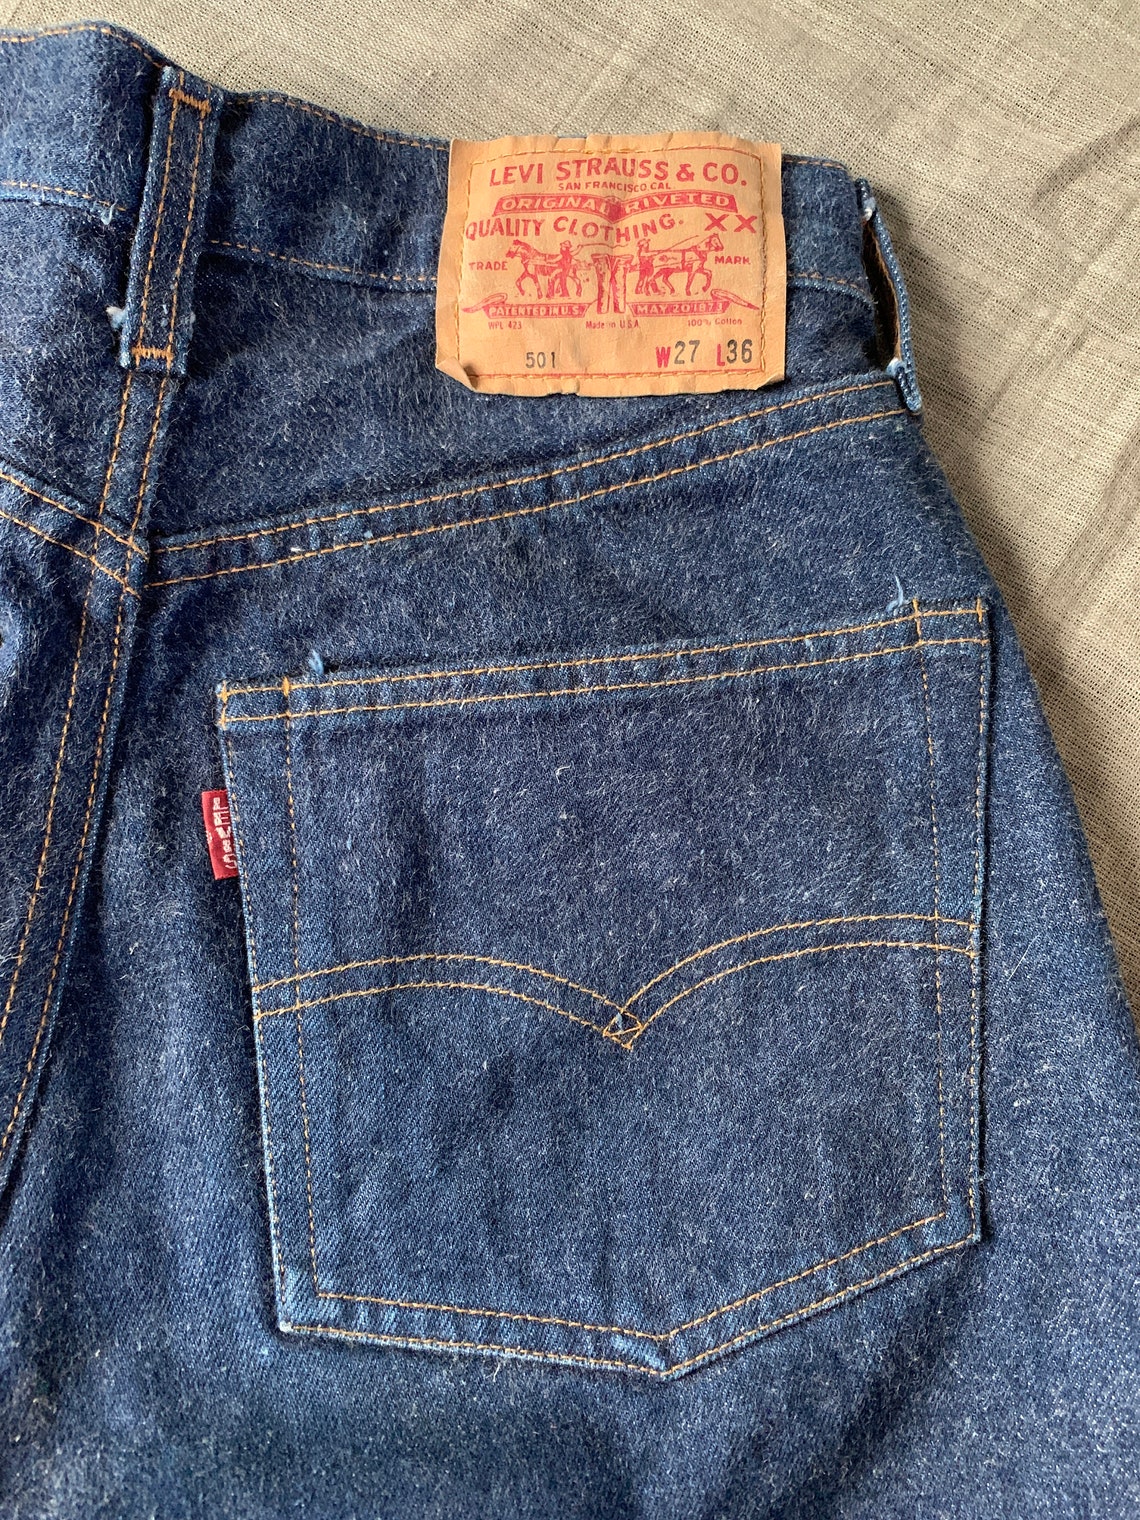 Vintage LEVIS 501 the first remake Redline from 90's | Etsy